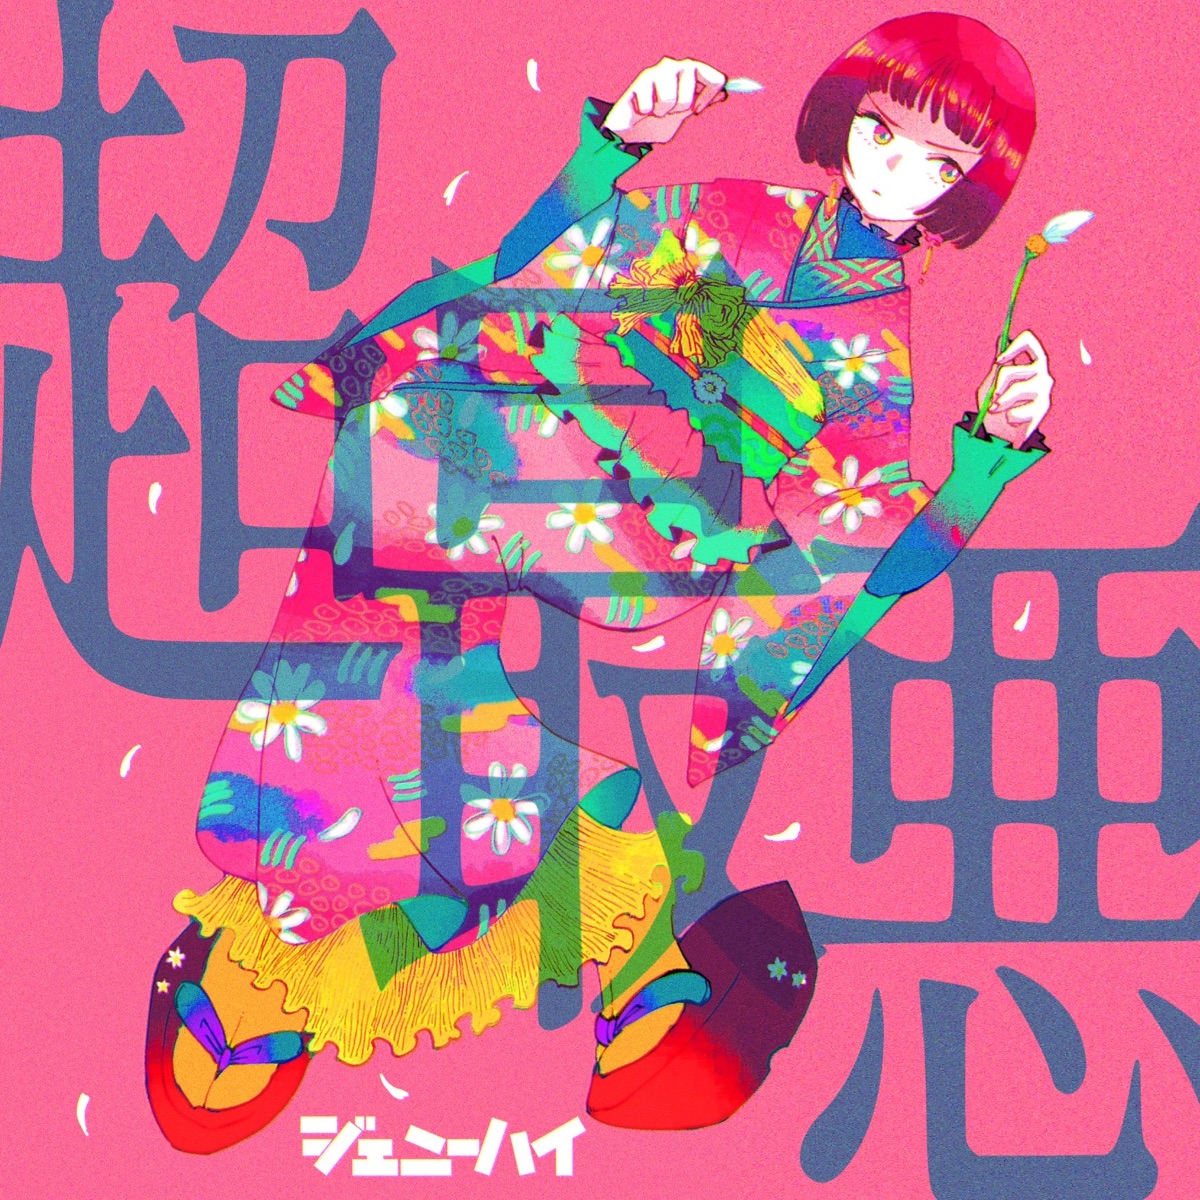 Cover art for『Genie High - 超最悪』from the release『Cho Saiaku